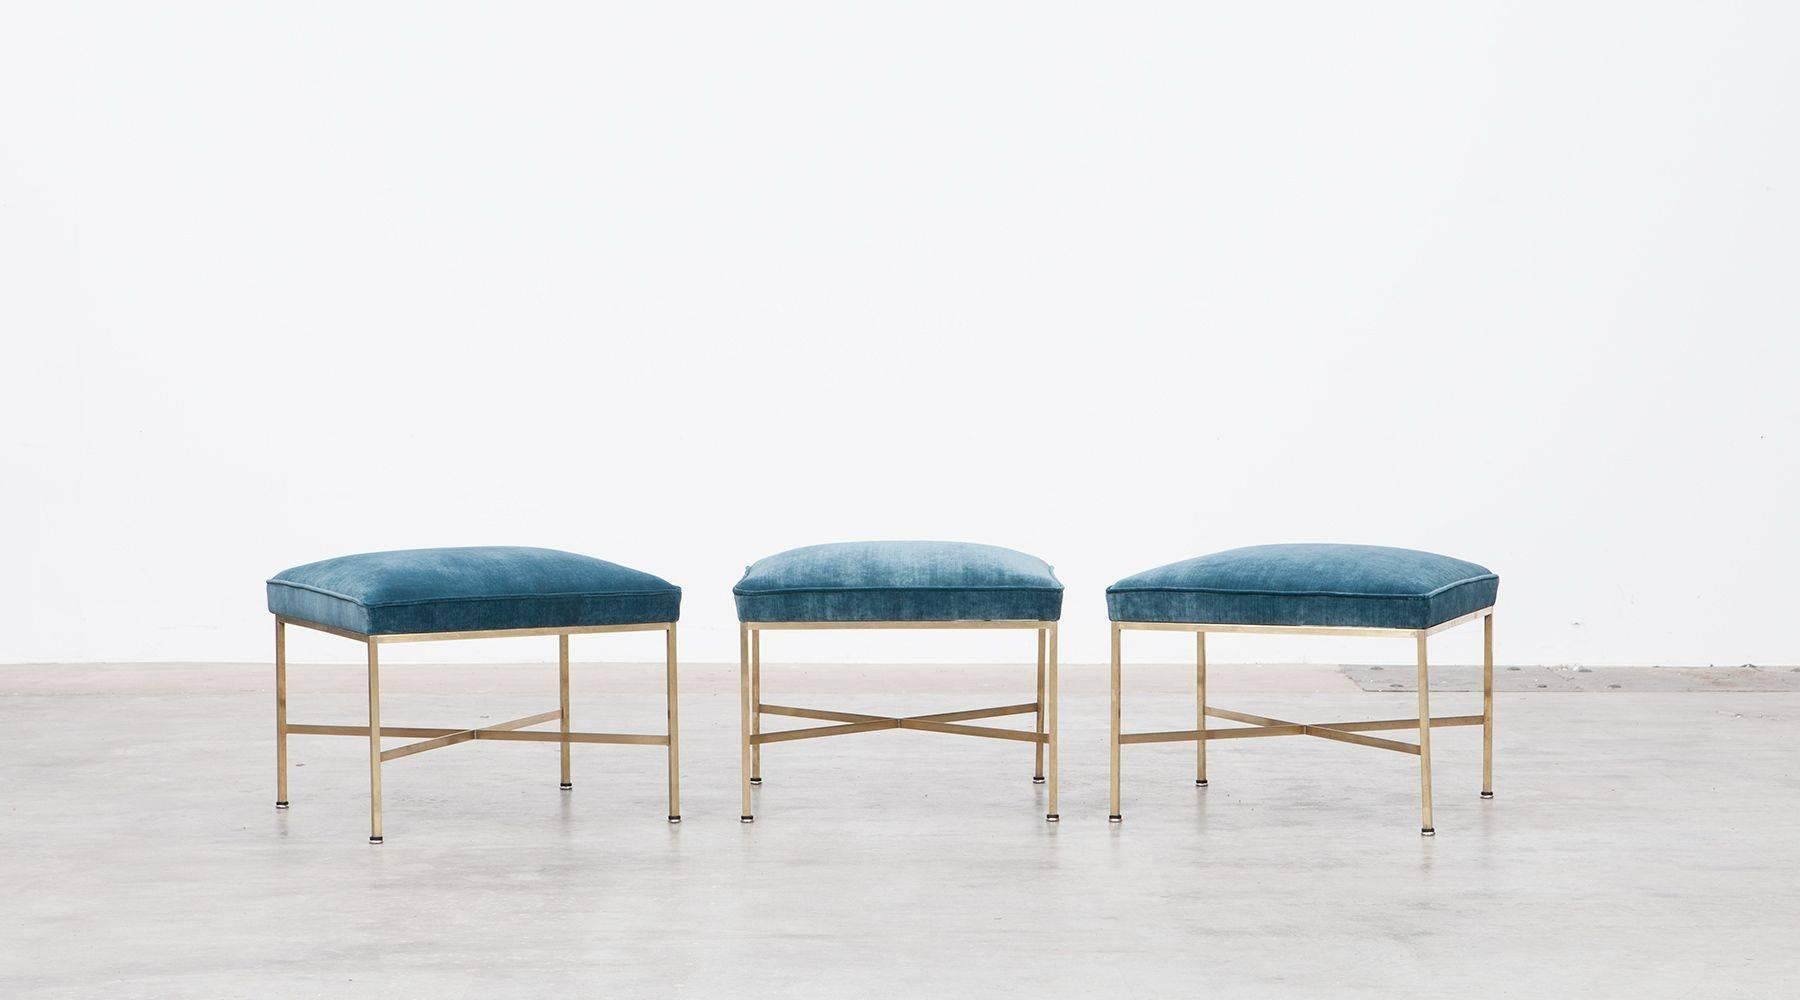 Beautiful and elegant set of three Paul McCobb stools. The solid brass square tubing is polished to a beautiful luster. The seats are newly upholstery with high-quality fabric. Wonderful examples of this design. Manufactured by Directional. 

